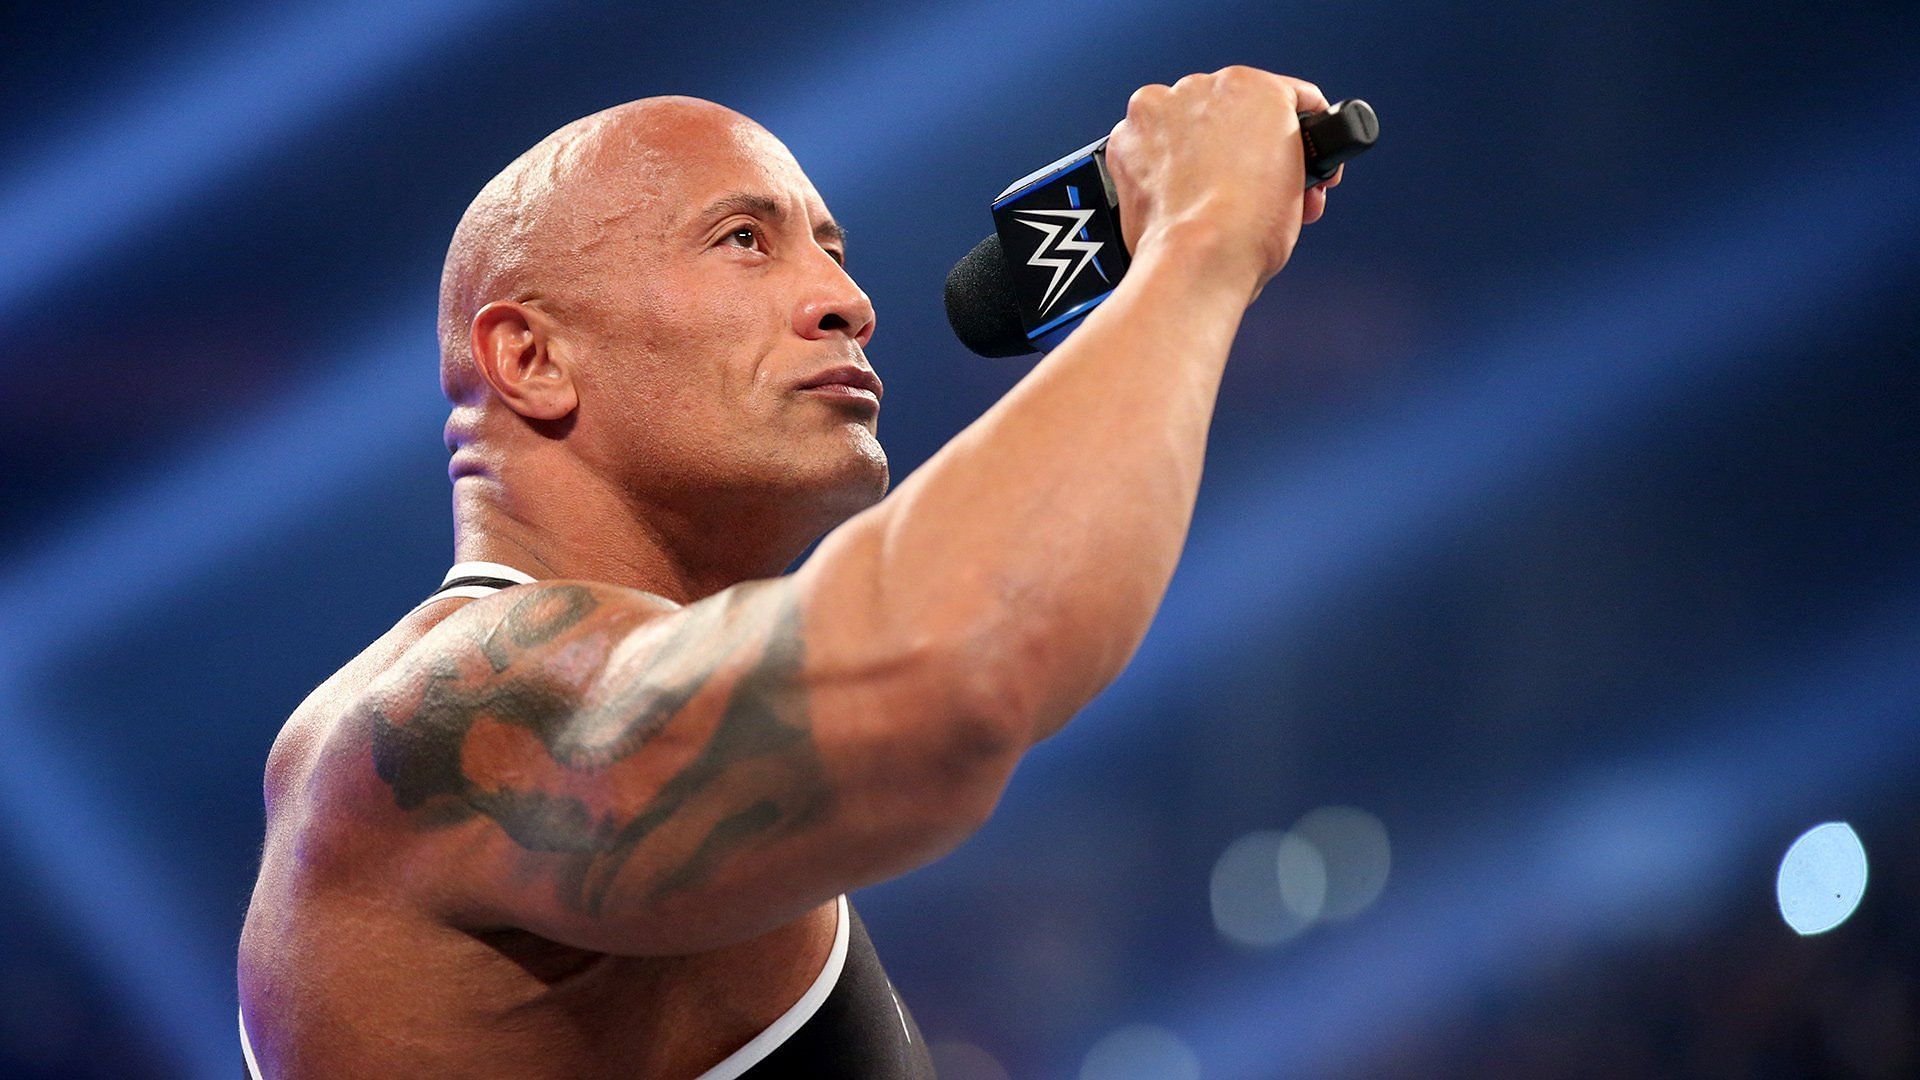 The Rock could return to set up for a feud with Roman!